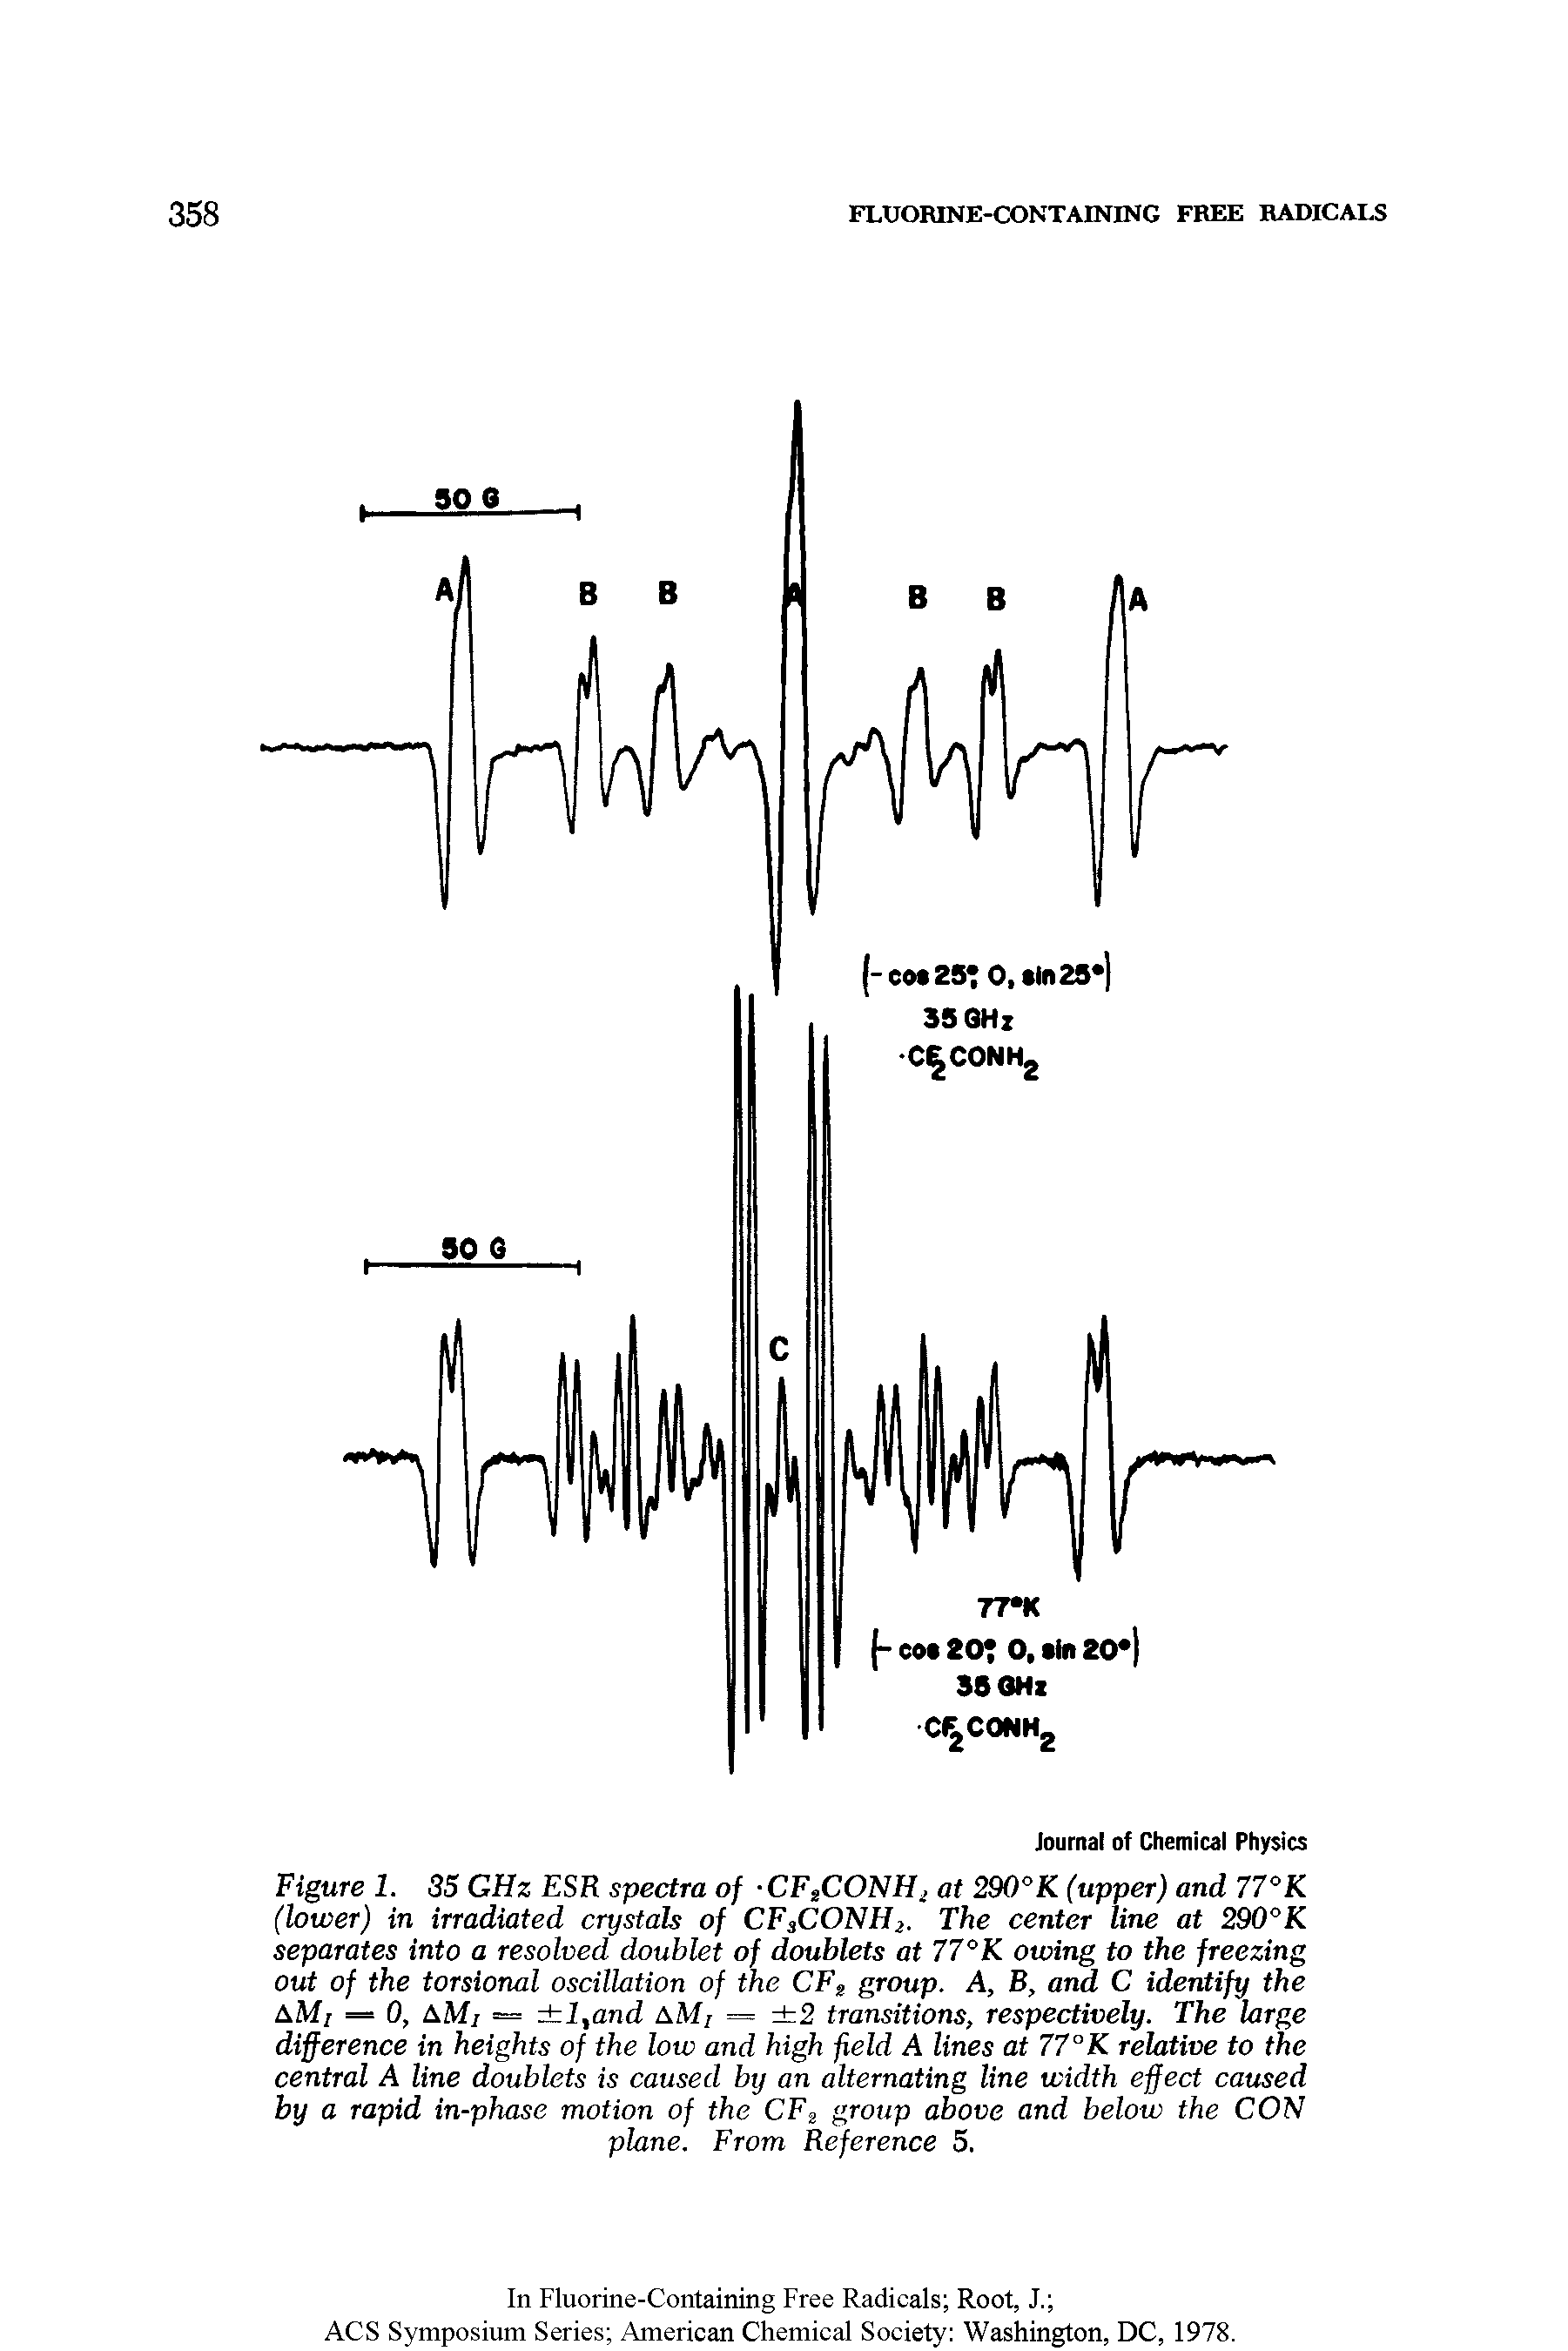 Figure 1. 35 GHz ESR spectra of -CFtCONHi at 290°K (upper) and 77 K (lower) in irradiated crystals of CFsCONH, The center line at 290°K separates into a resolved doublet of doublets at 77°K owing to the freezing out of the torsional oscillation of the CFg group. A, B, and C identify the Mi — 0, Mi = l,and aM, = 2 transitions, respectively. The large difference in heights of the low and high field A lines at 77°K relative to the central A line doublets is caused by an alternating line width effect caused by a rapid in-phase motion of the CF group above and below the CON plane. From Reference 5.